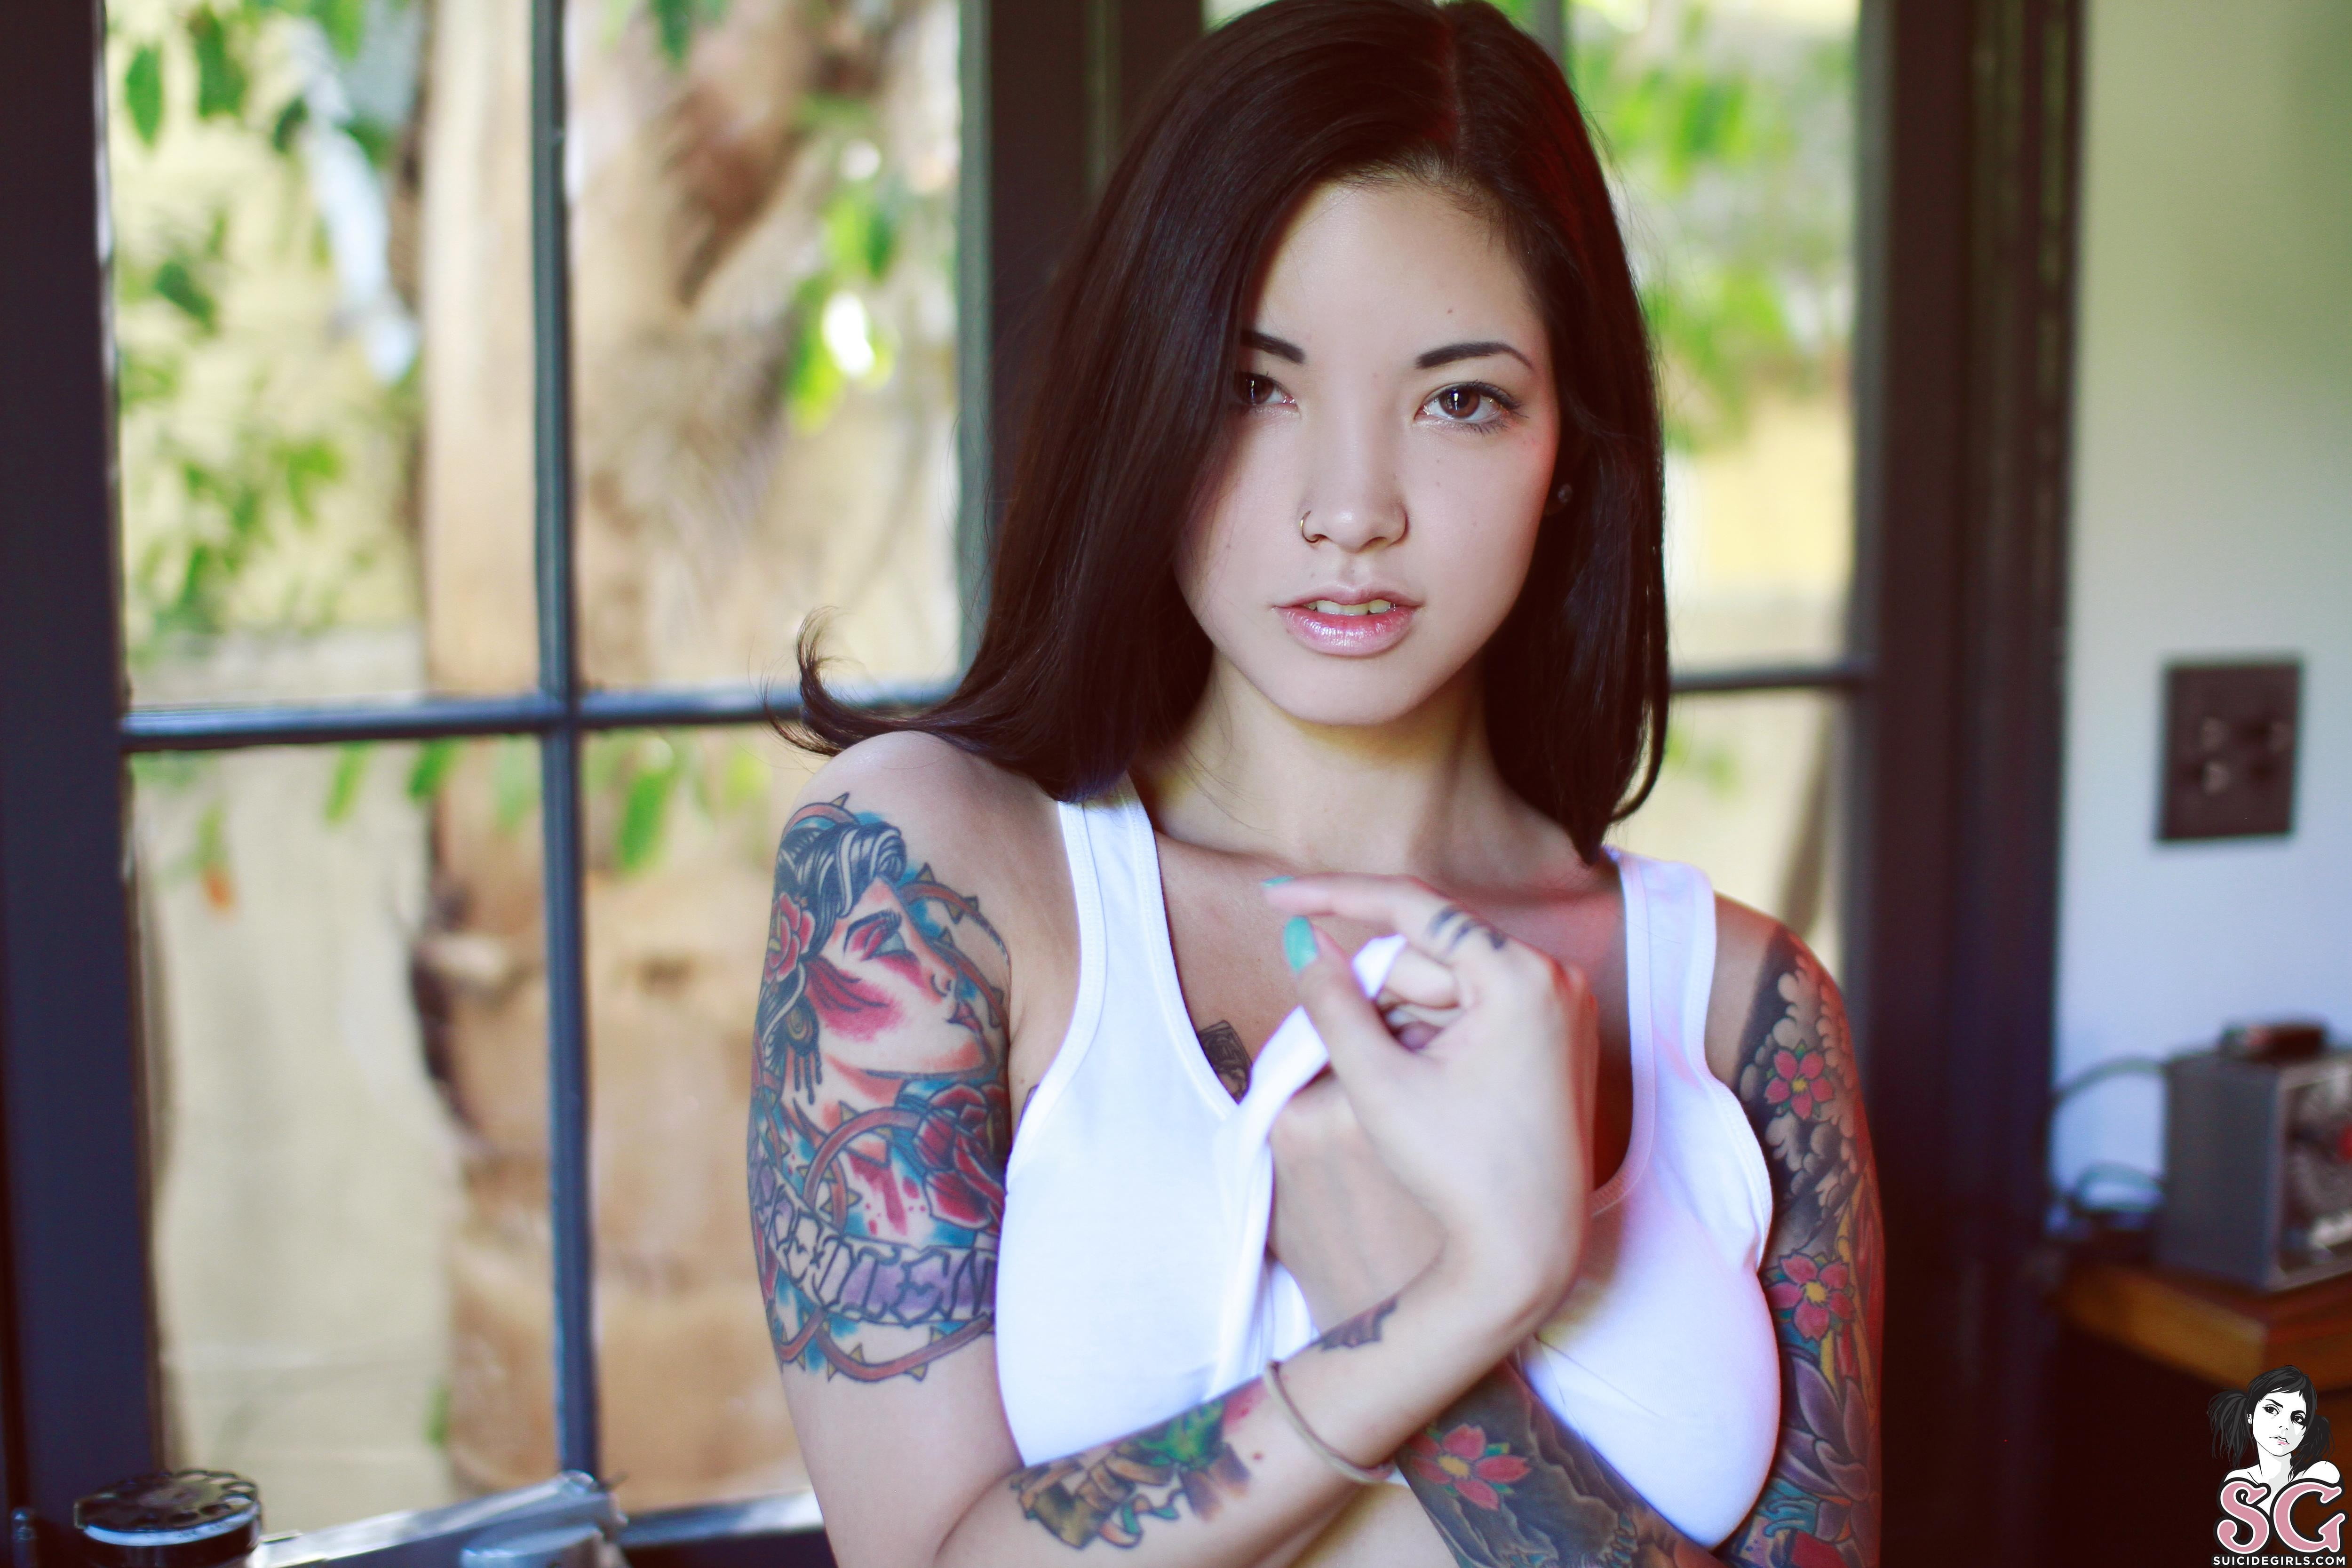 Free Photos - An Attractive Woman With A Visible Tattoo On Her Arm And A  Nose Piercing. She Has Long Hair And Is Wearing A Necklace, Further  Accentuating Her Unique And Stylish